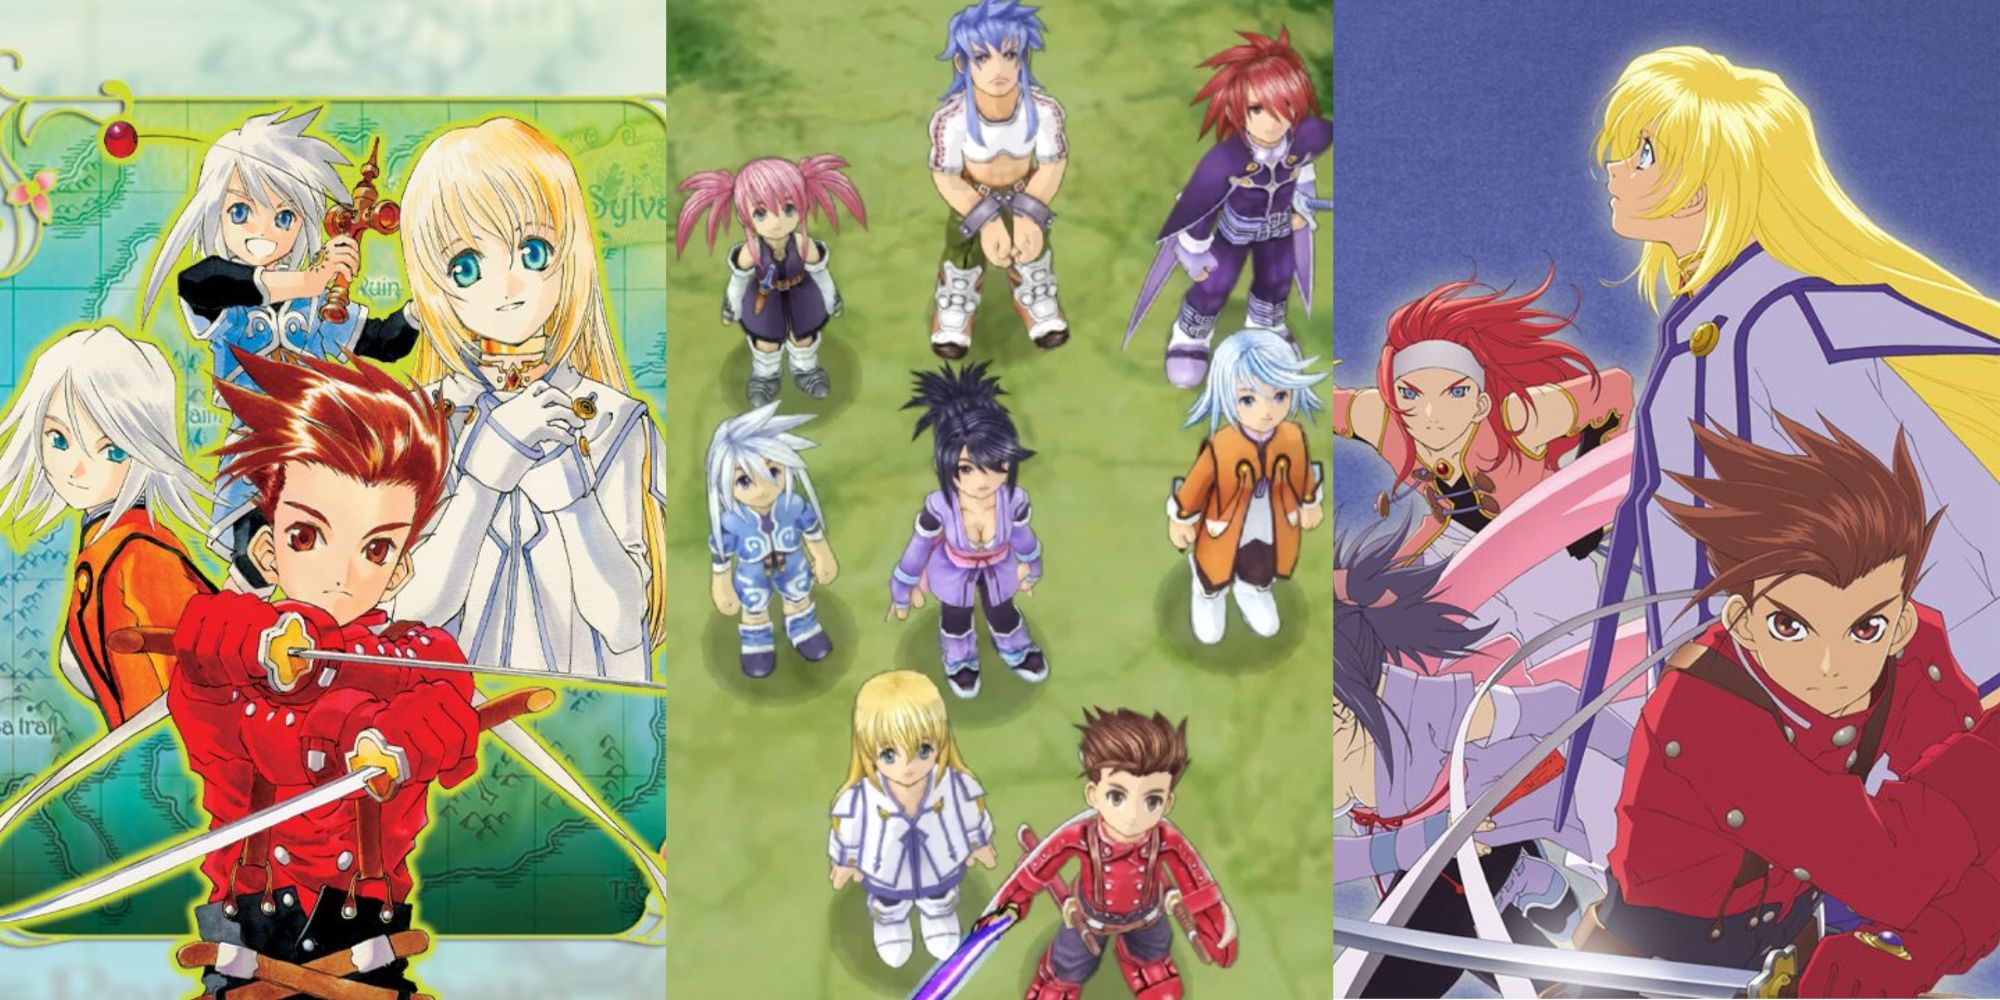 Two different sets of promotional art showing off some of the cast form Tales Of Symphonia and an in-game shot of the full playable cast (minus Zelos)